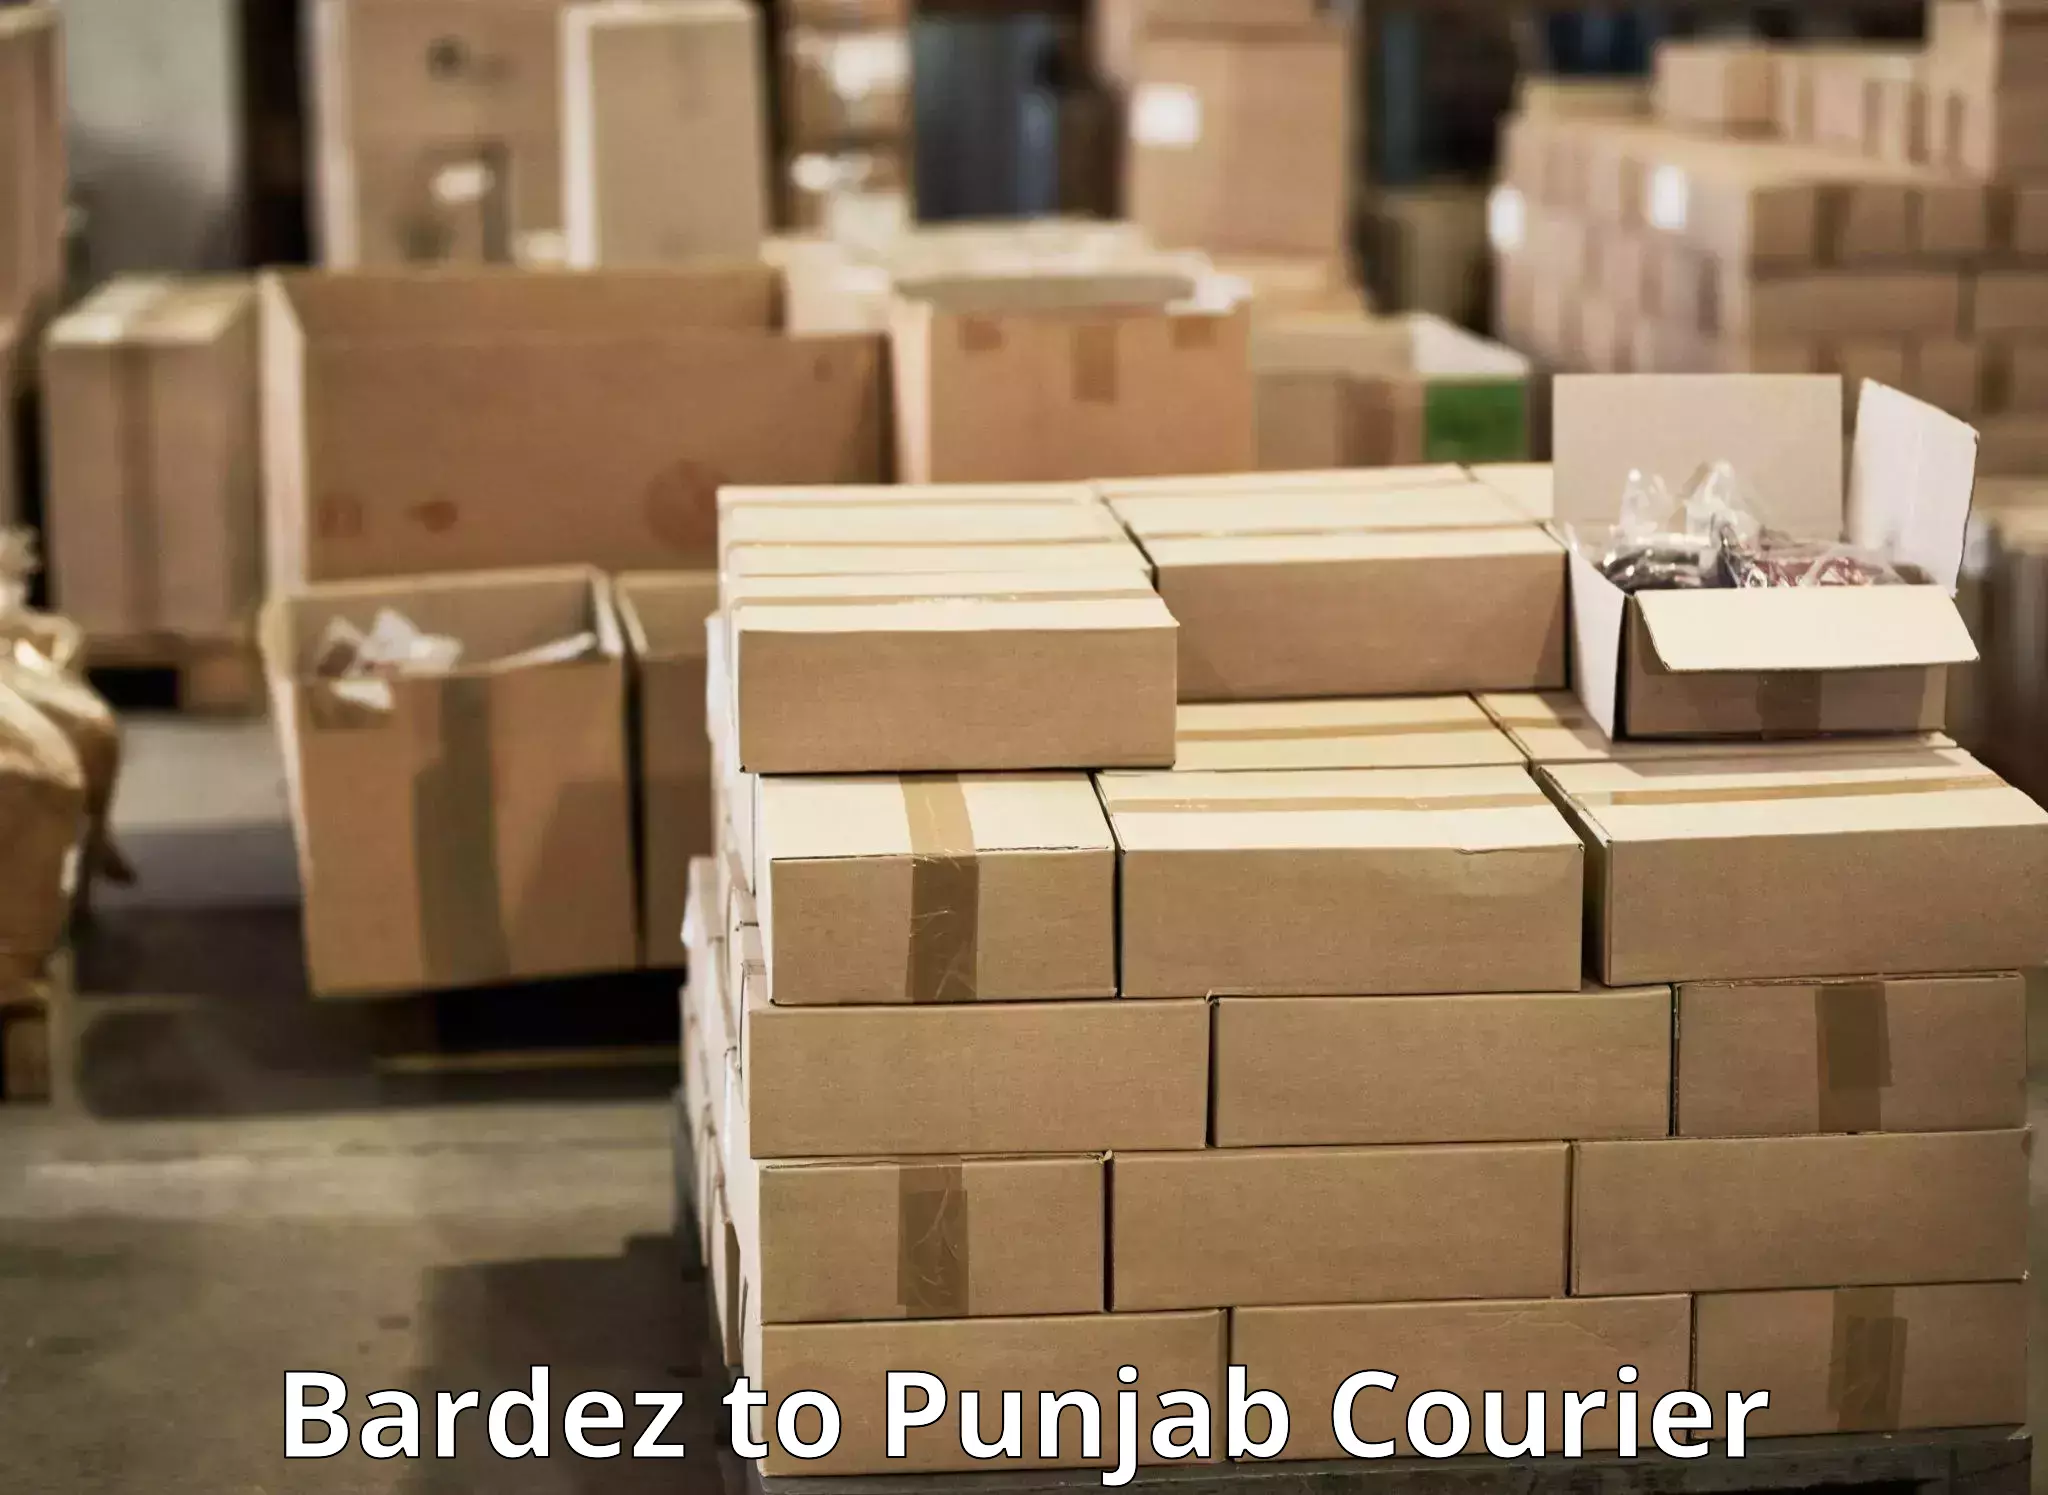 Weekend courier service Bardez to Firozpur